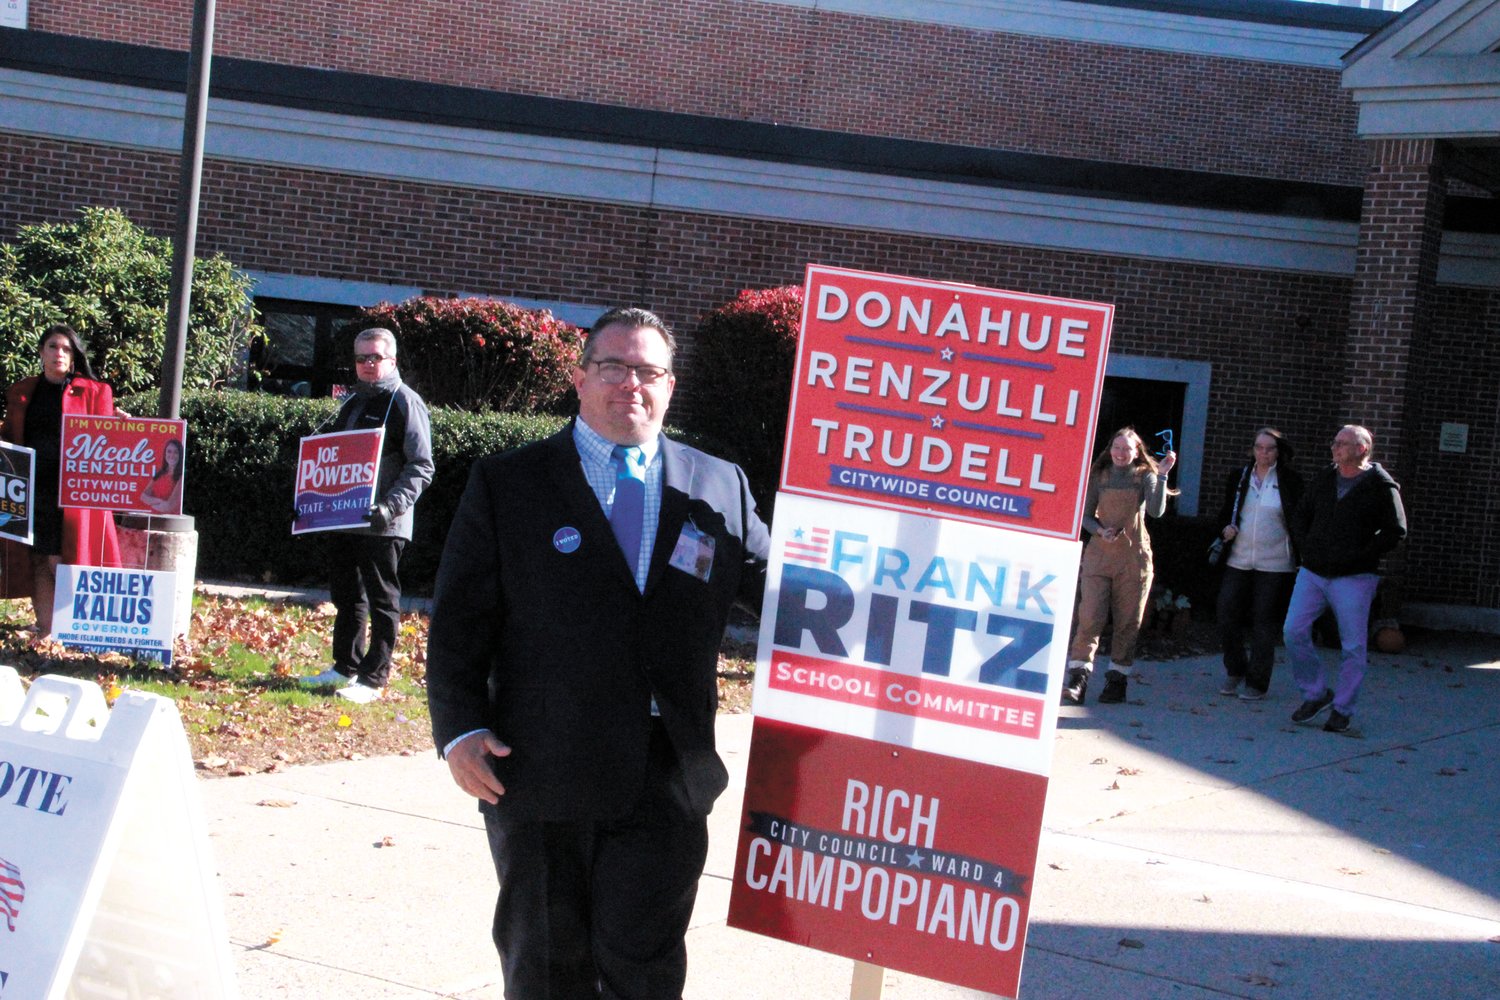 CAMPAIGNING: Thomas Trudell outside Hope Highlands Middle School campaigning on Election Day. (Herald photo)